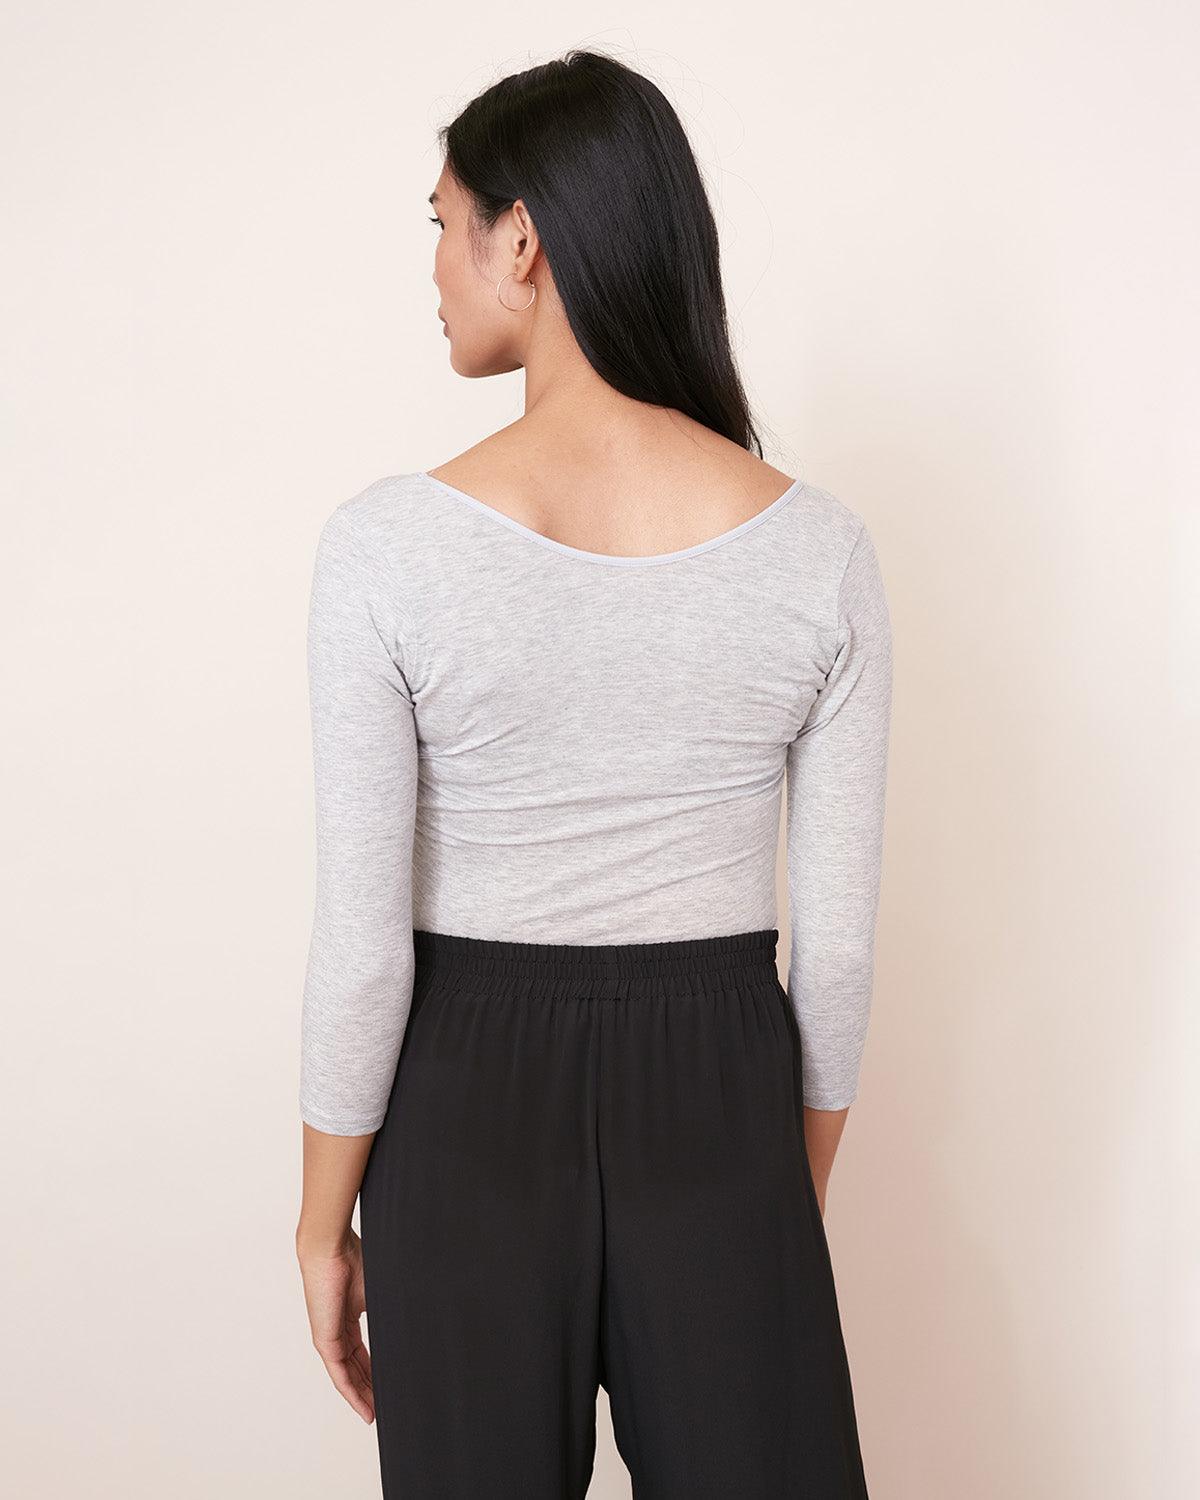 "#color_HEATHER GREY|Aiko is 5'8", wearing a size XS